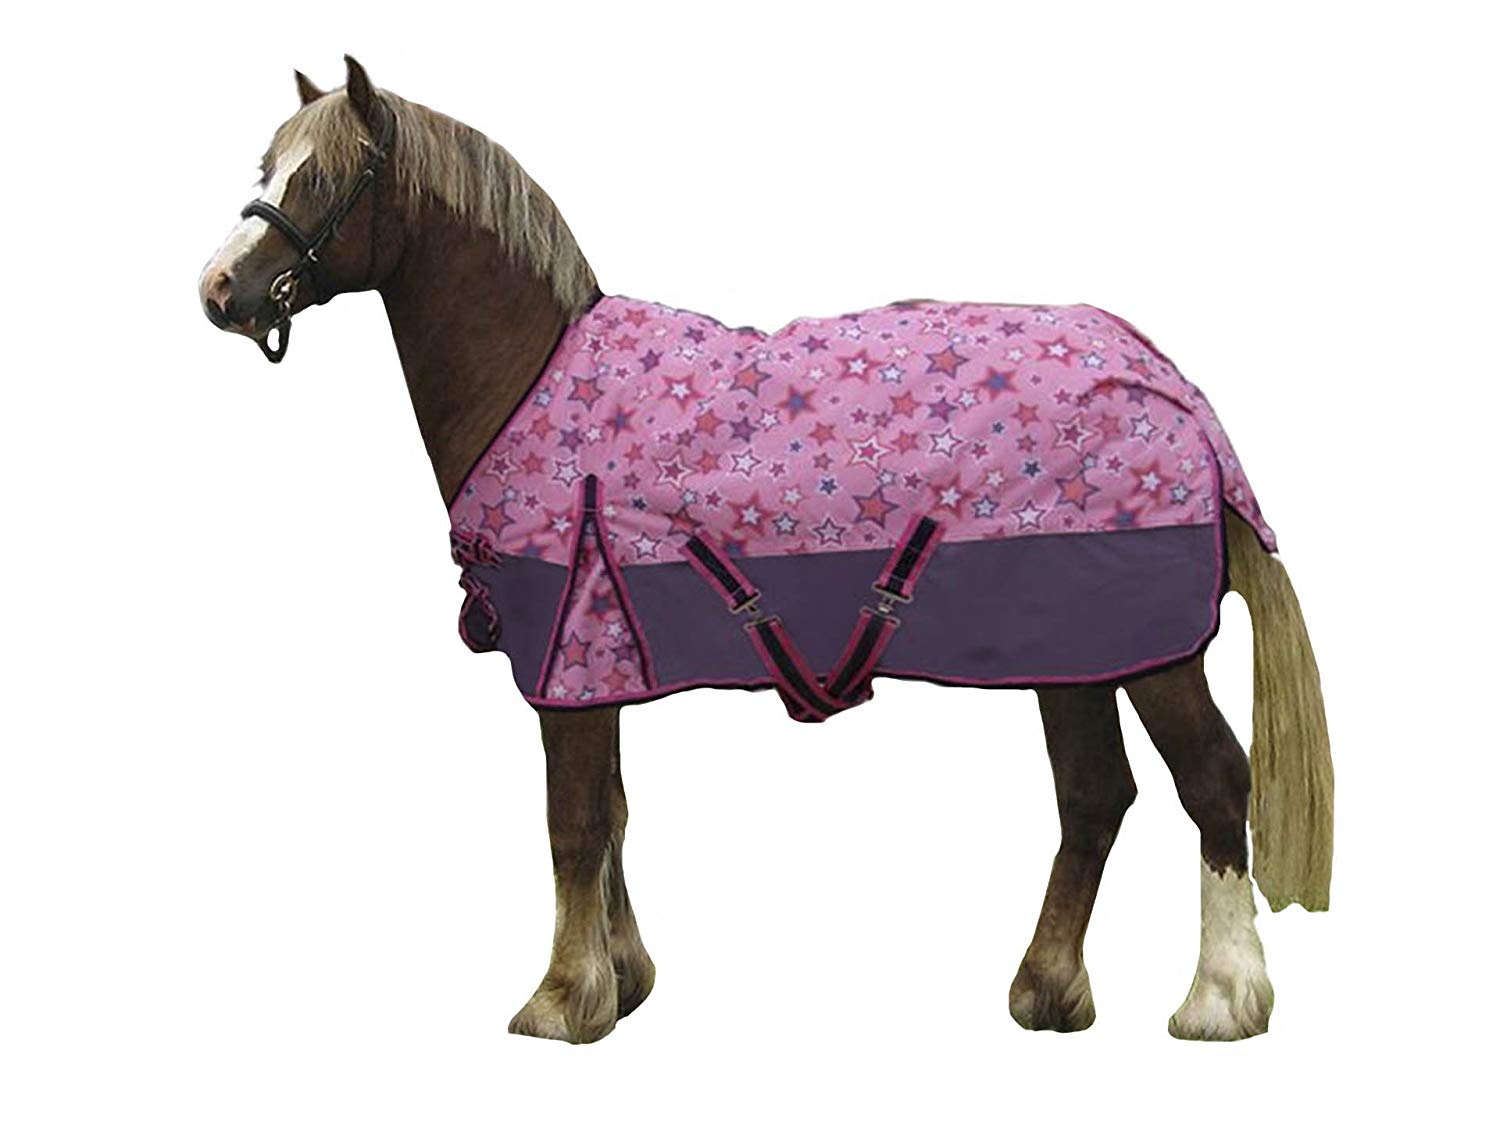 derby-originals-600d-shimmering-star-miniature-horse-and-pony-turnout-blanket-cheap-pony-blankets